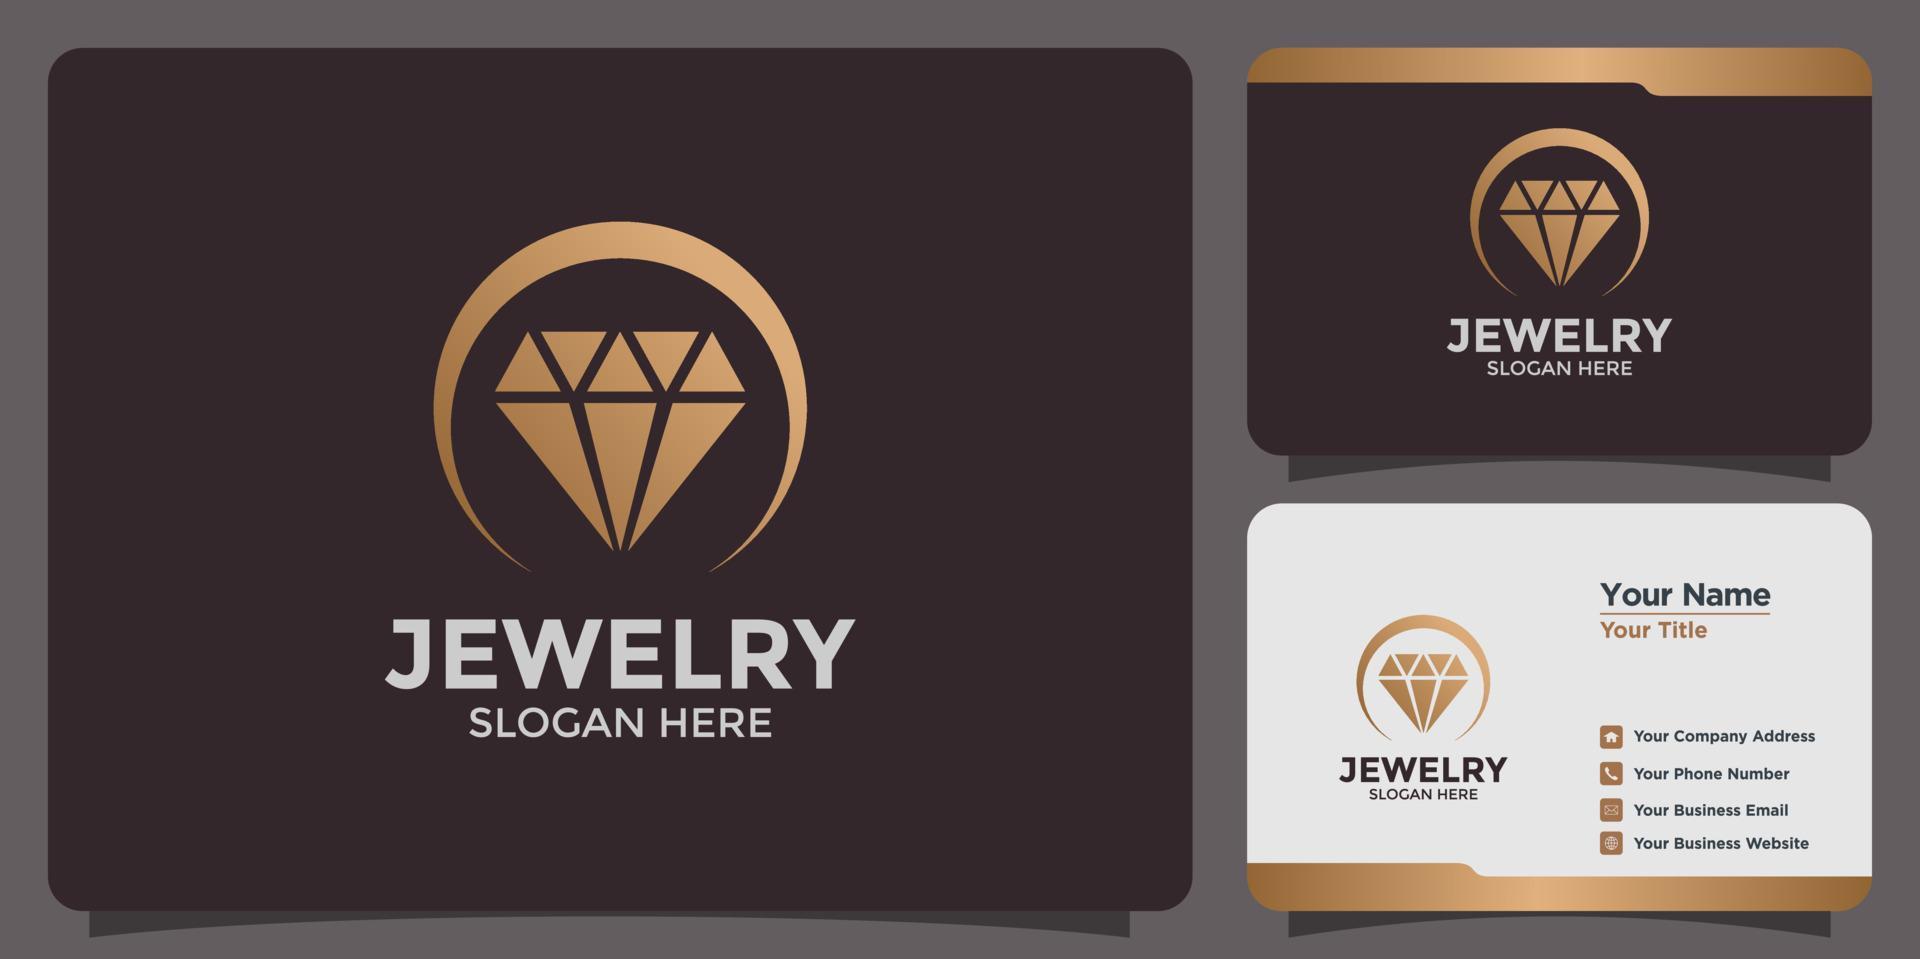 Necklace Display Card Template Set, Printable Necklace Cards Logo